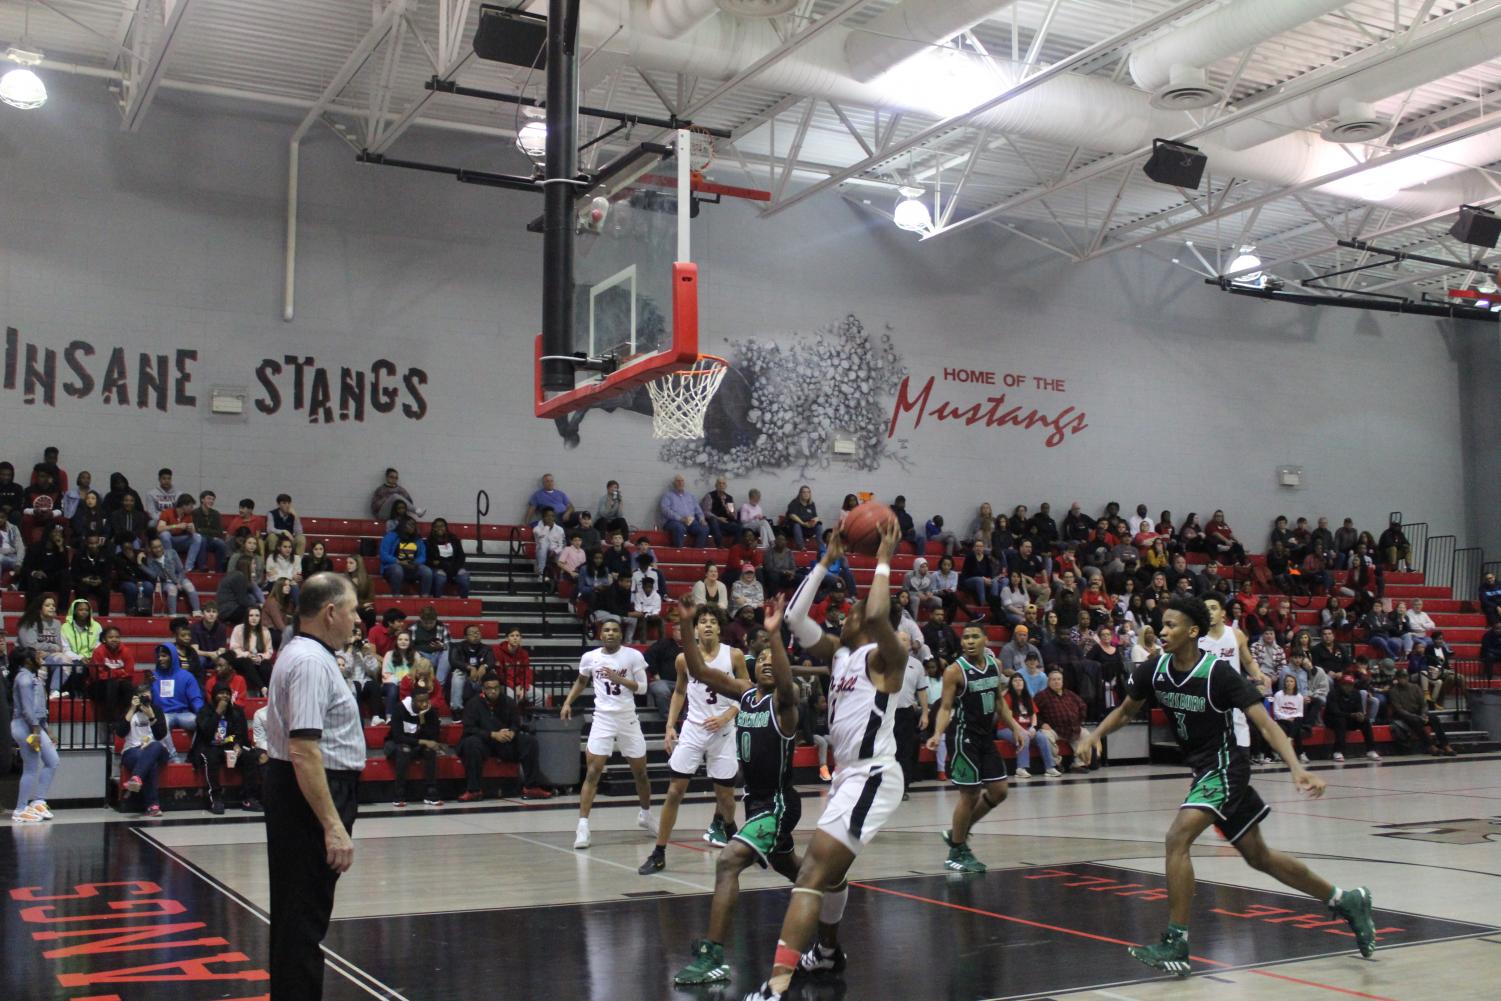 Center+Hill+defeats+Vicksburg+69-60+in+second+round+of+state+basketball+playoffs